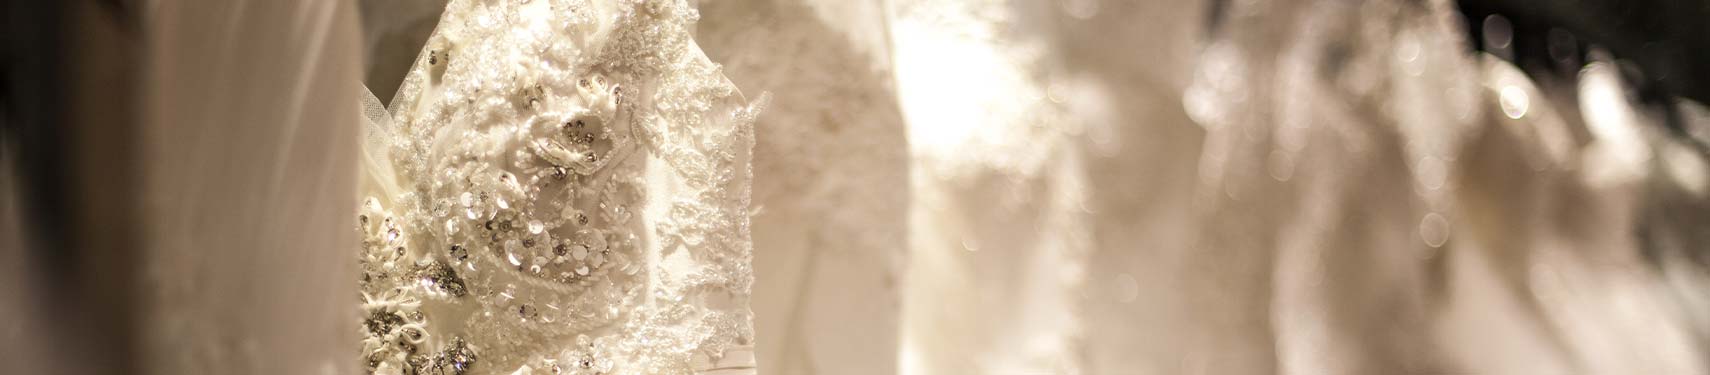 wedding gowns on rack